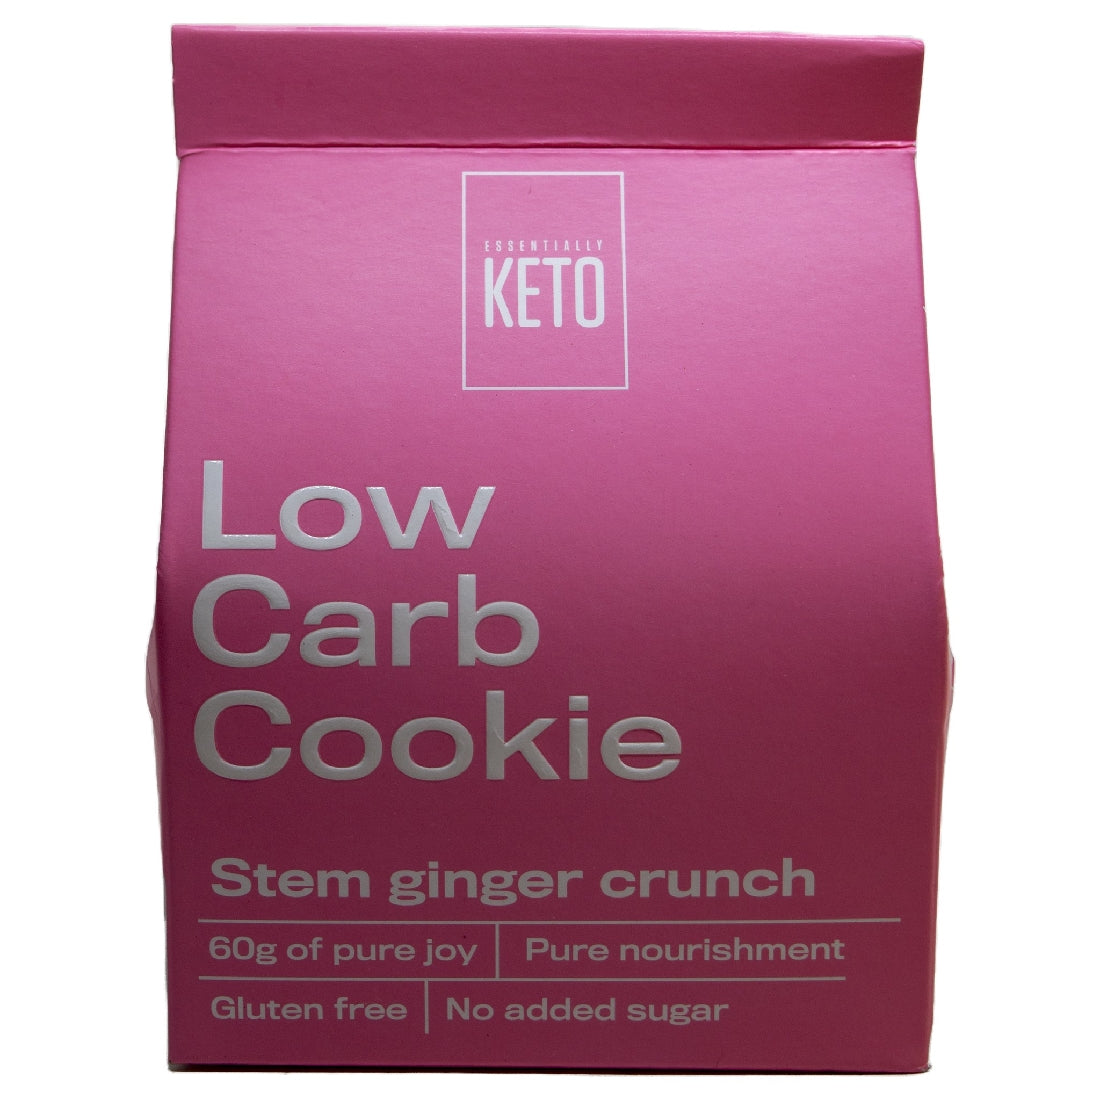 ESSENTIALLY KETO LOW CARB COOKIE